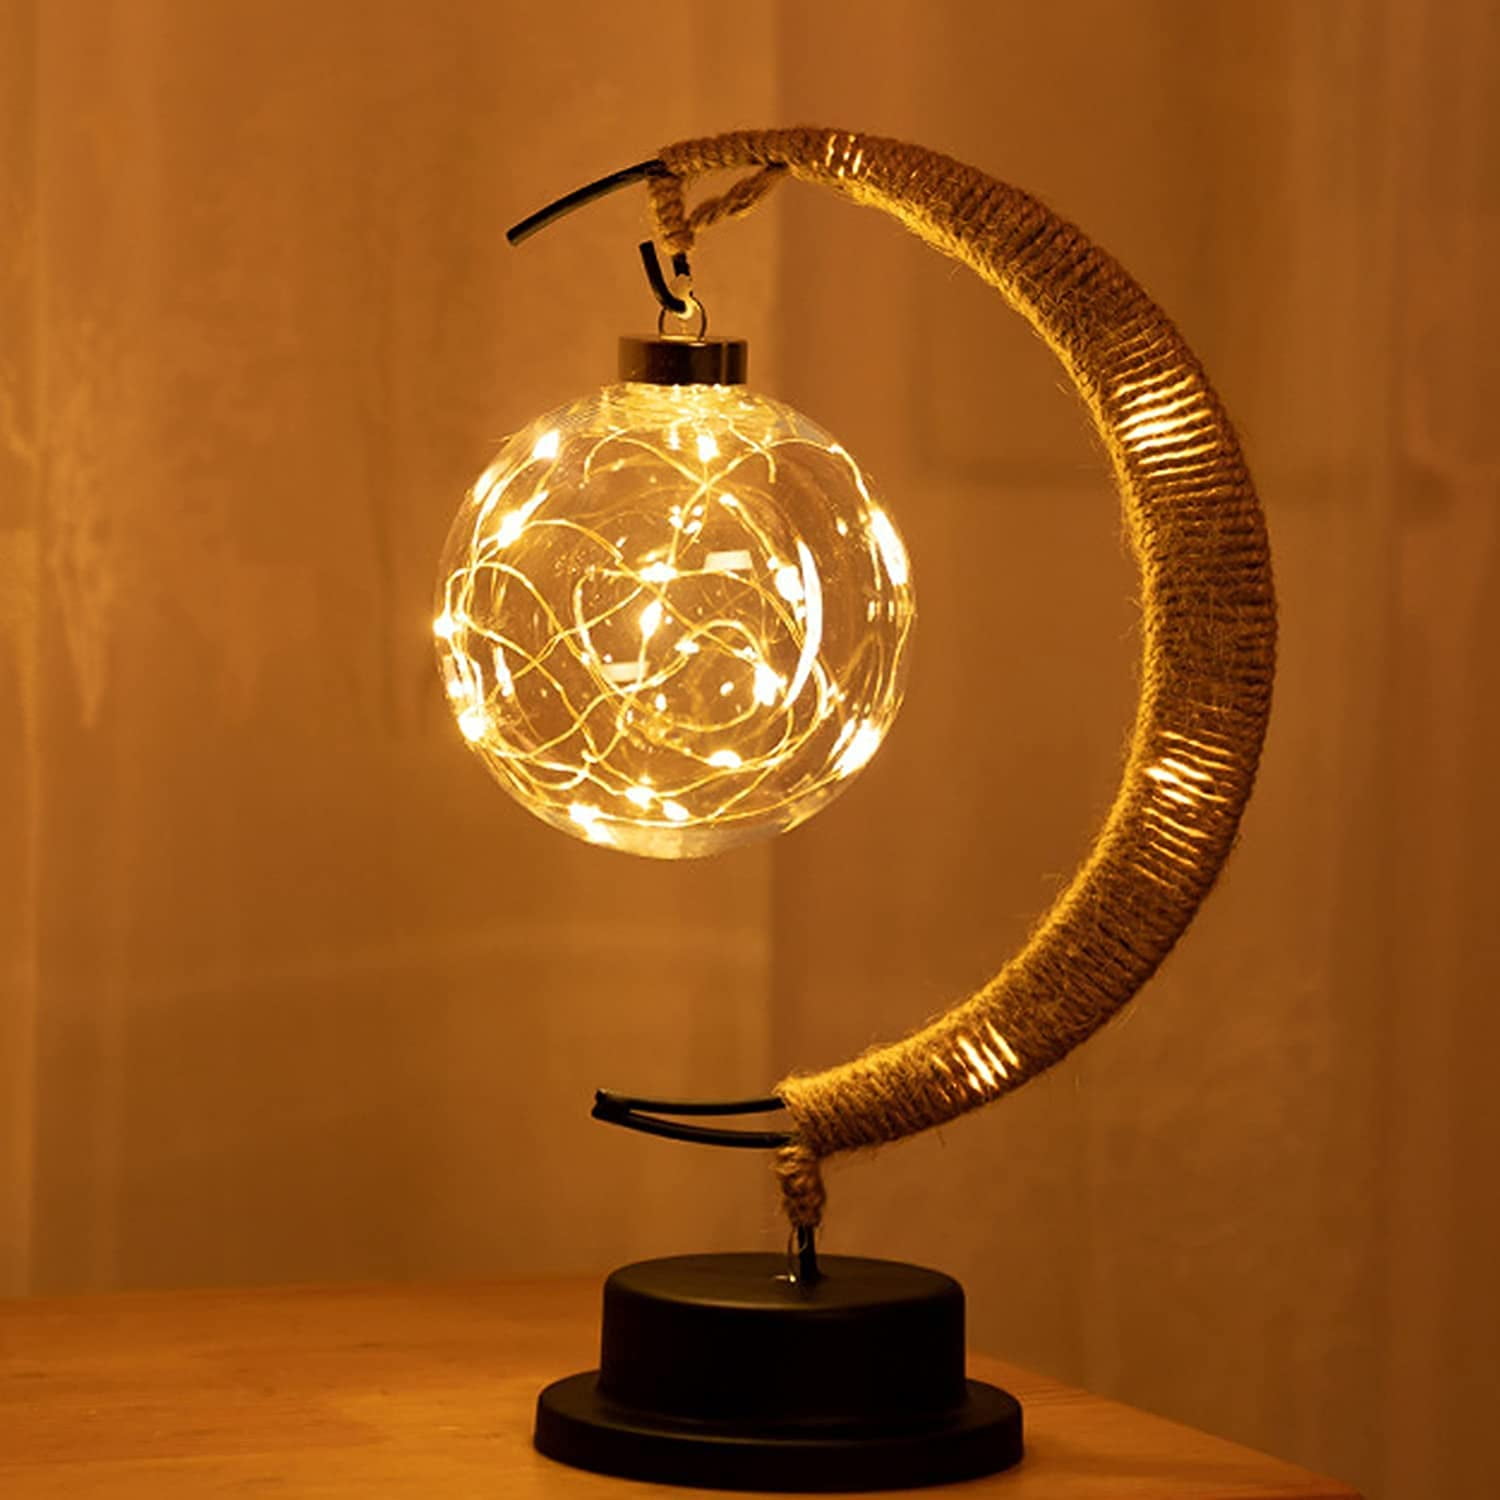 The Enchanted Lunar Lamp - Hanging LED Moon Lamp Night Light with Stand